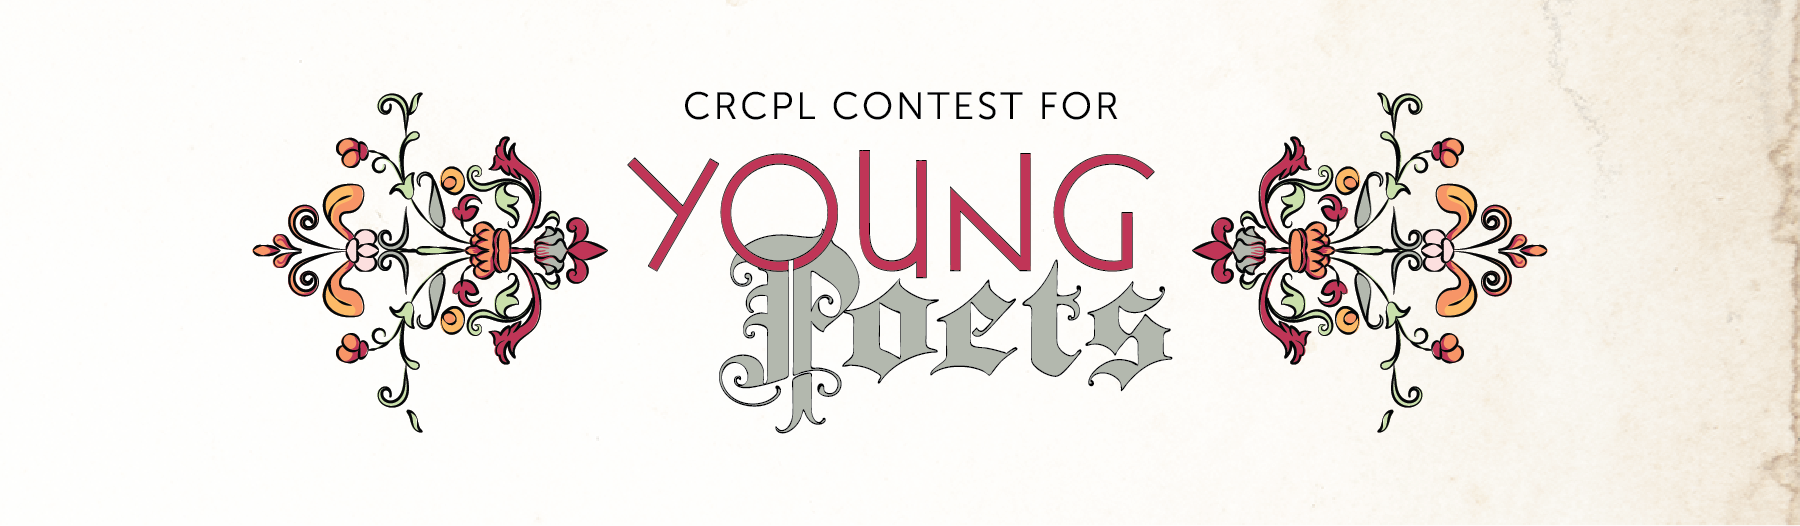 Contest for Young Poets